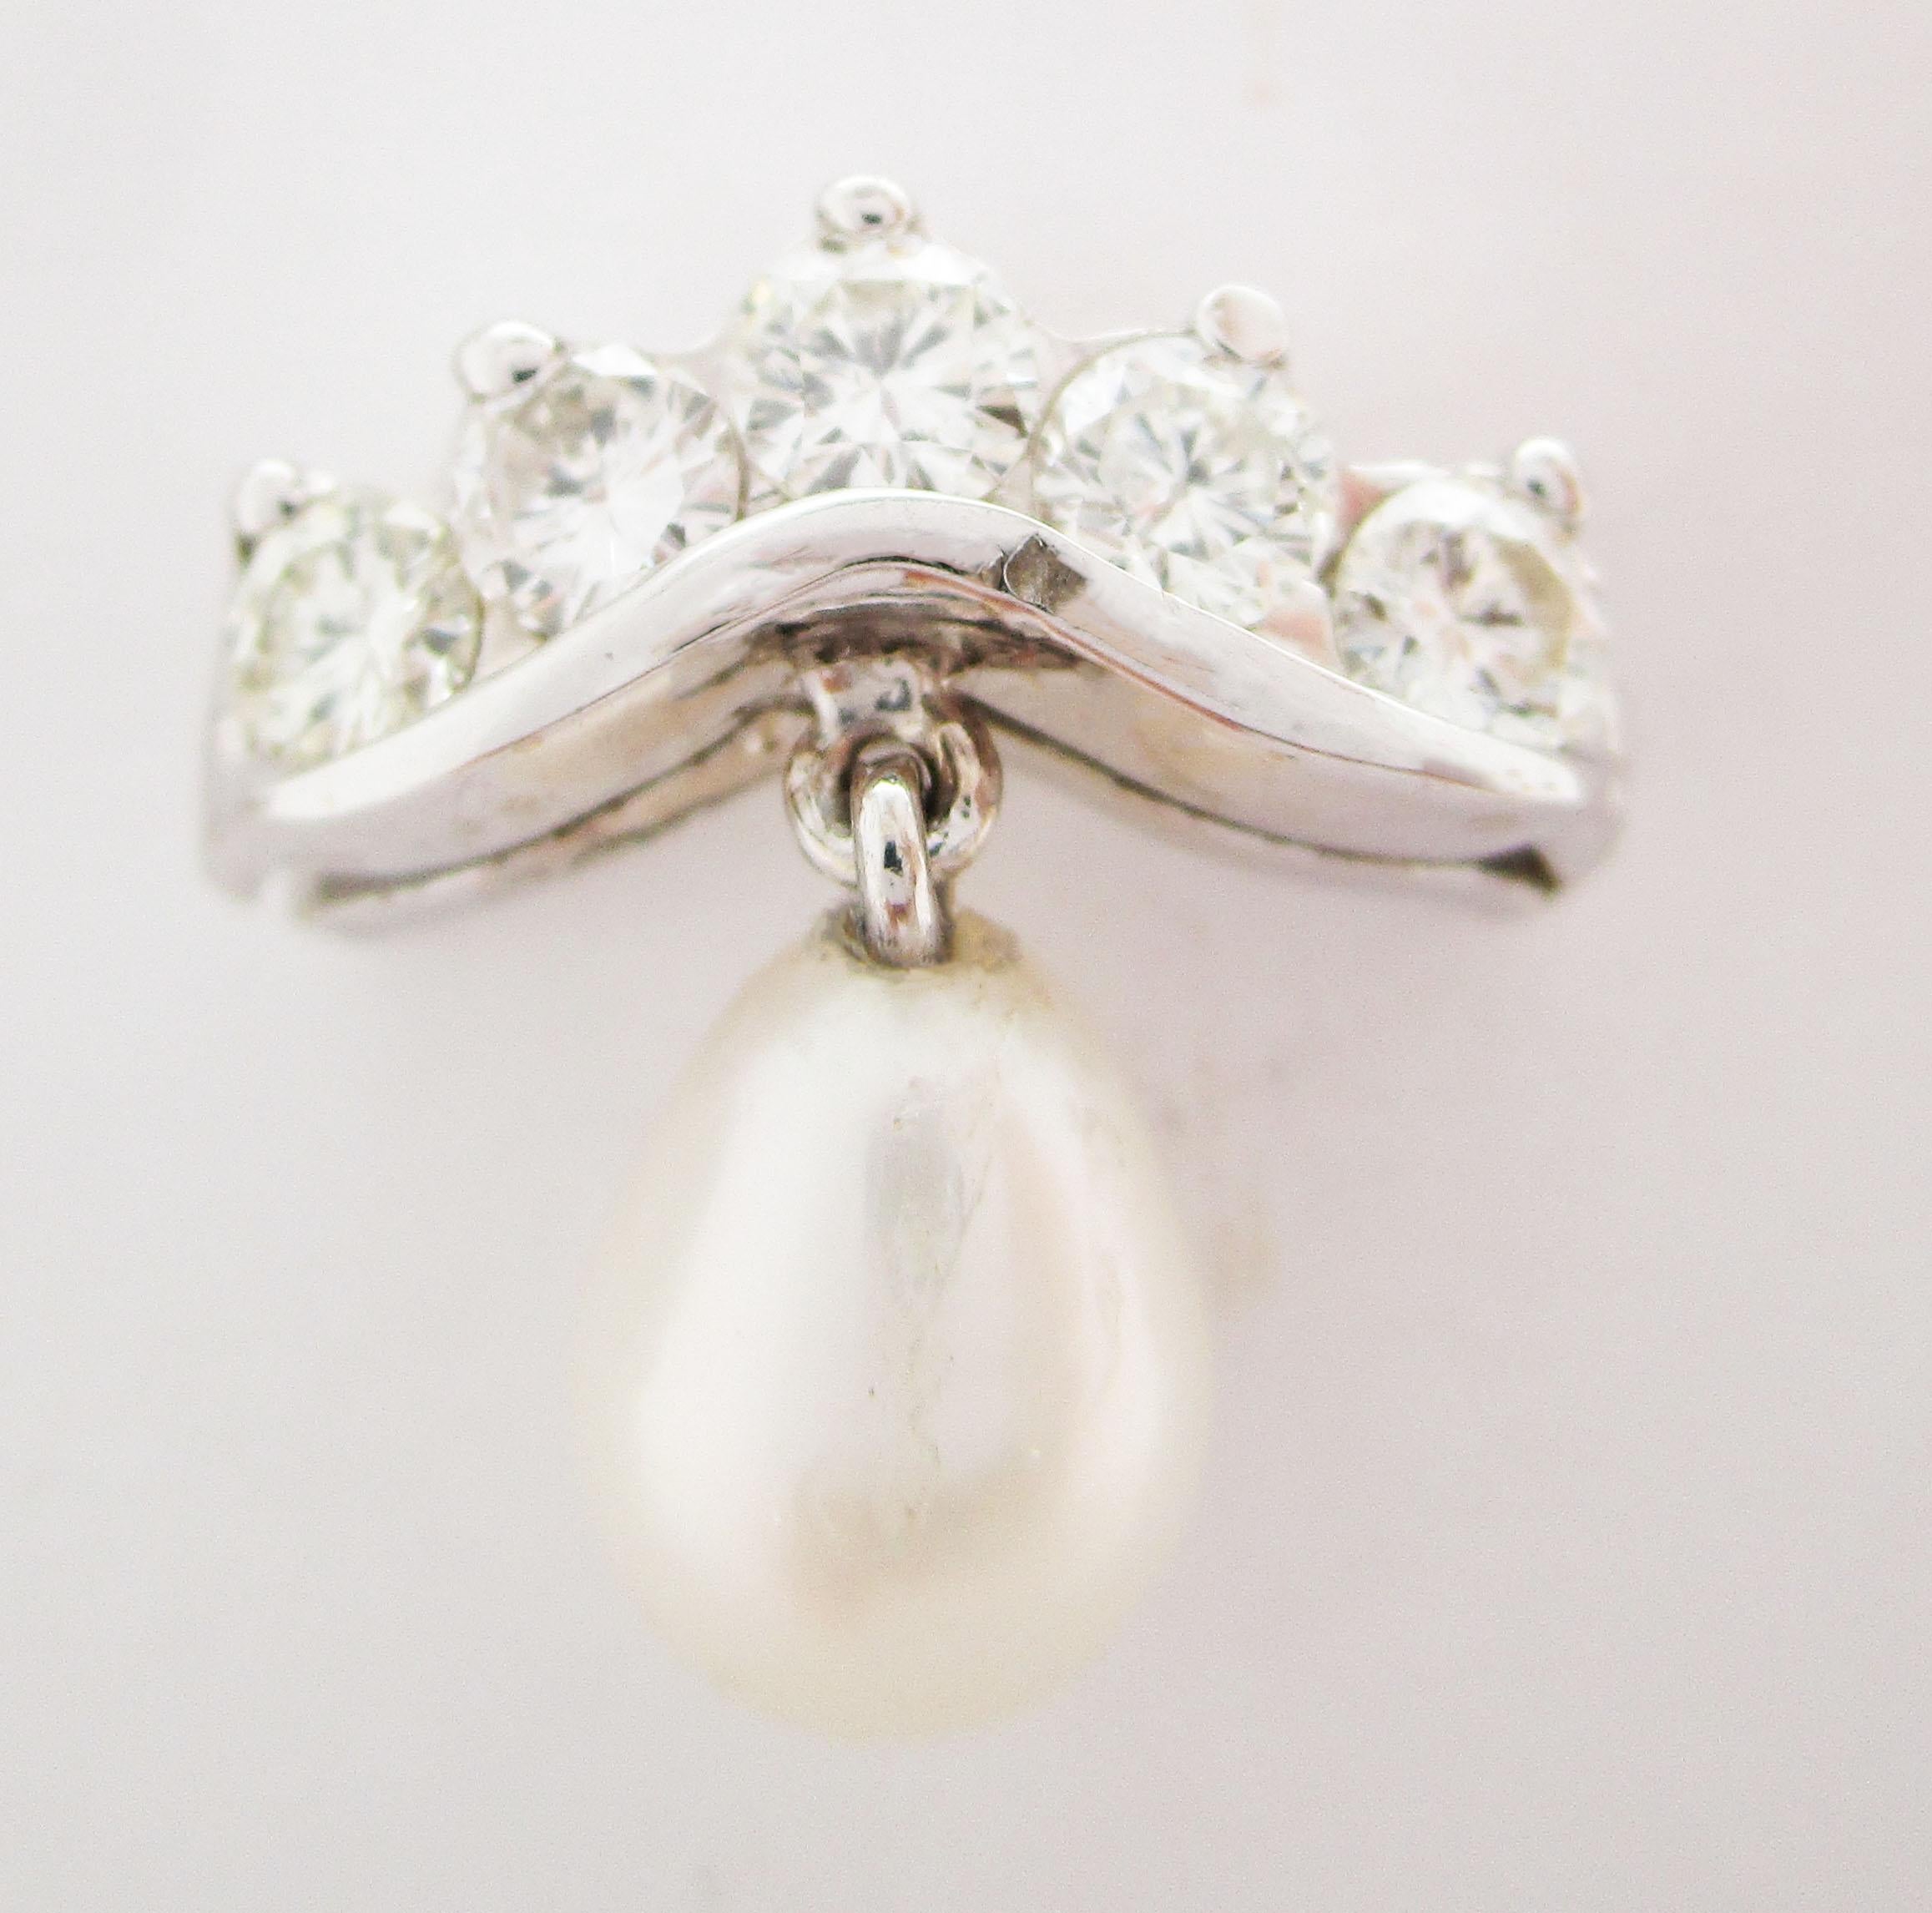 pearl necklace with crown in middle